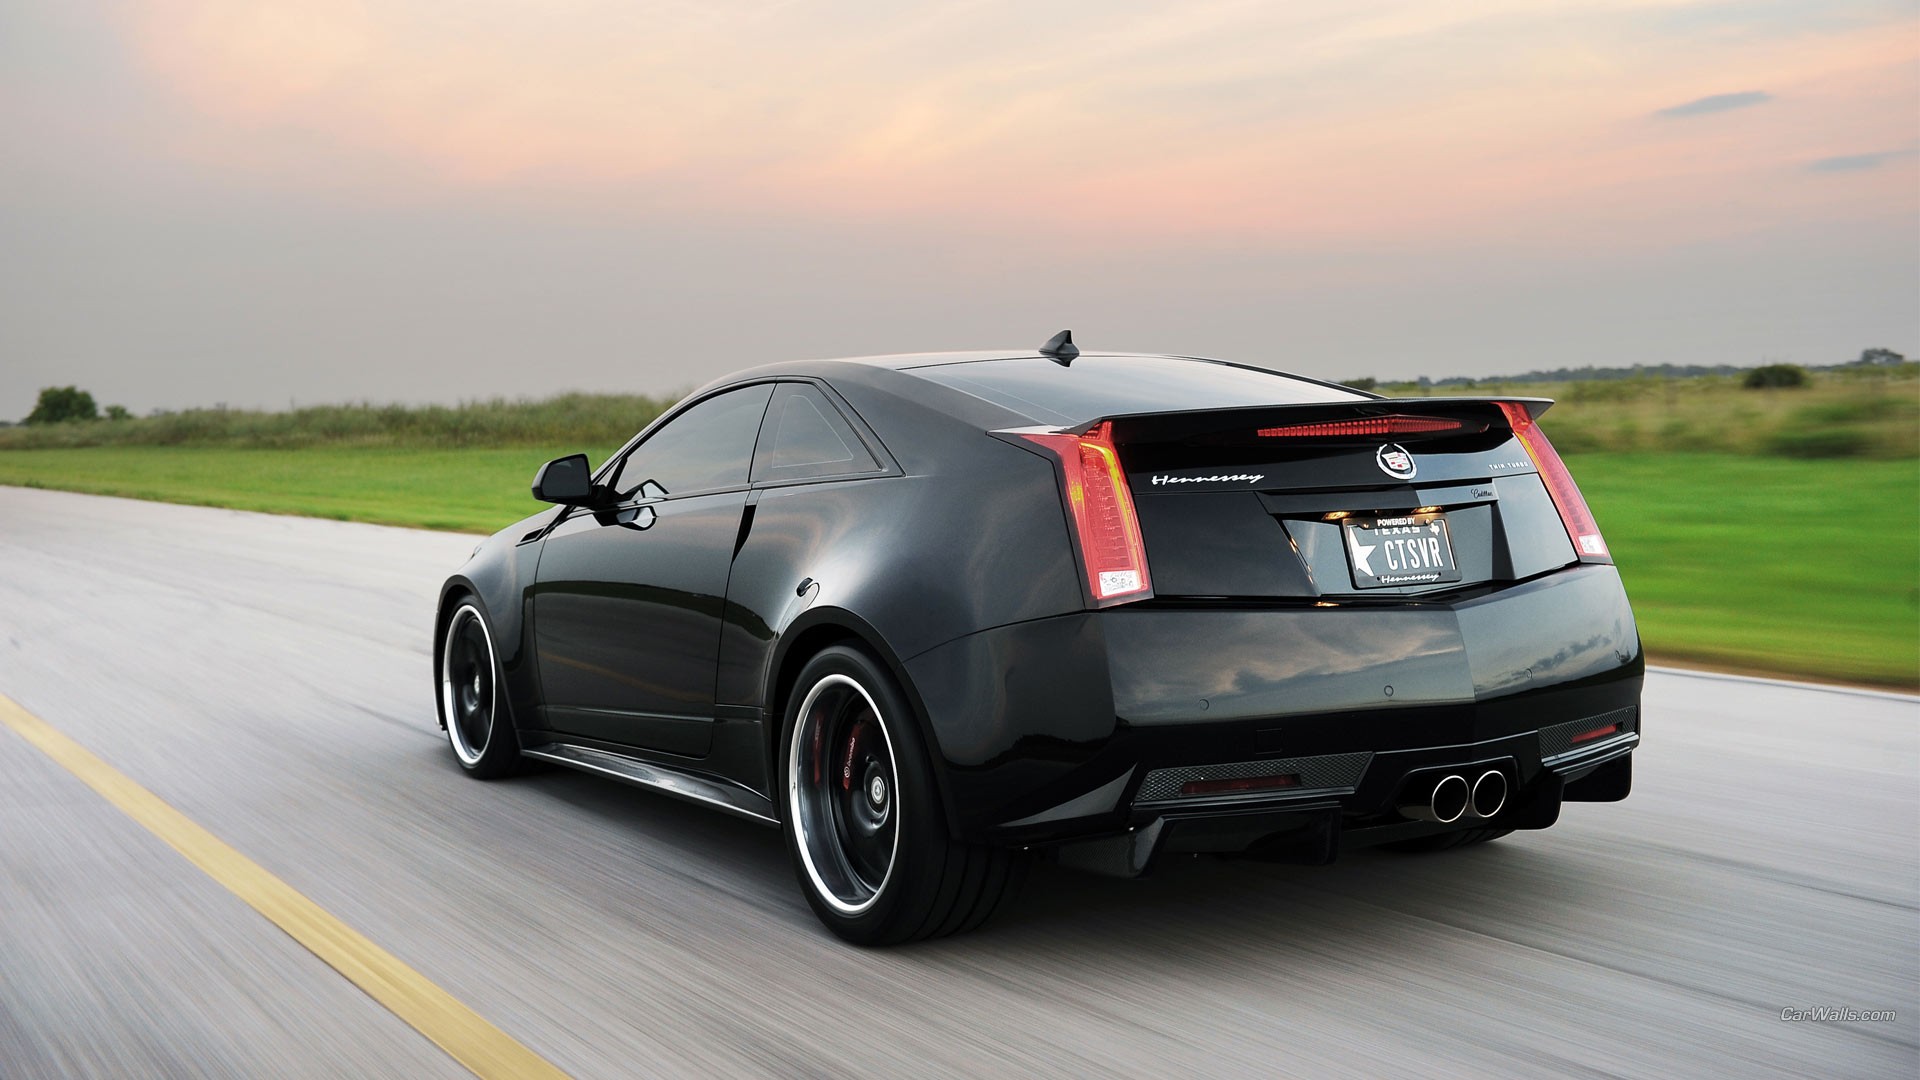 Wallpapers land transport Cadillac CTS V cadillac on the desktop